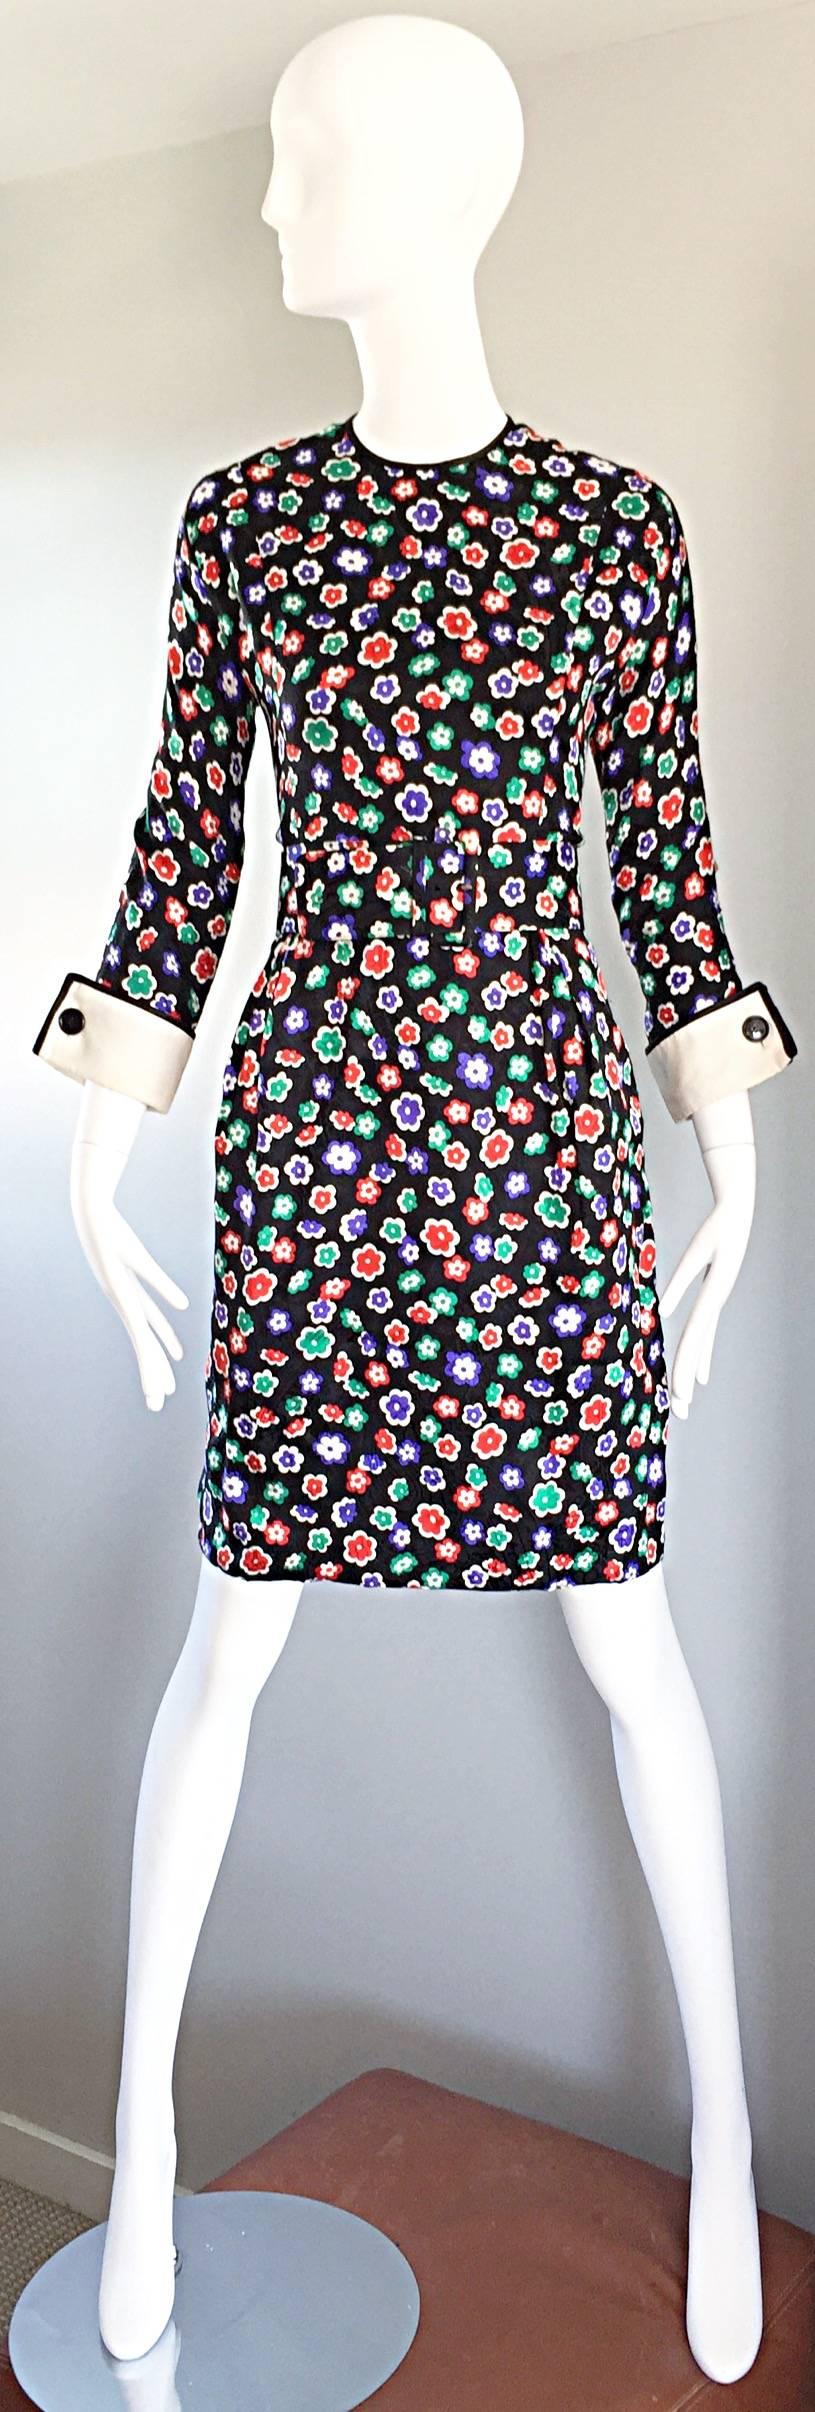 Chic vintage GEOFFREY BEENE black long sleeve dress with red, blue, green, and white printed flowers throughout. Pockets at both sides of the waist. Features a detachable belt, and white French cuffs. Extremely well made, with interior strap at